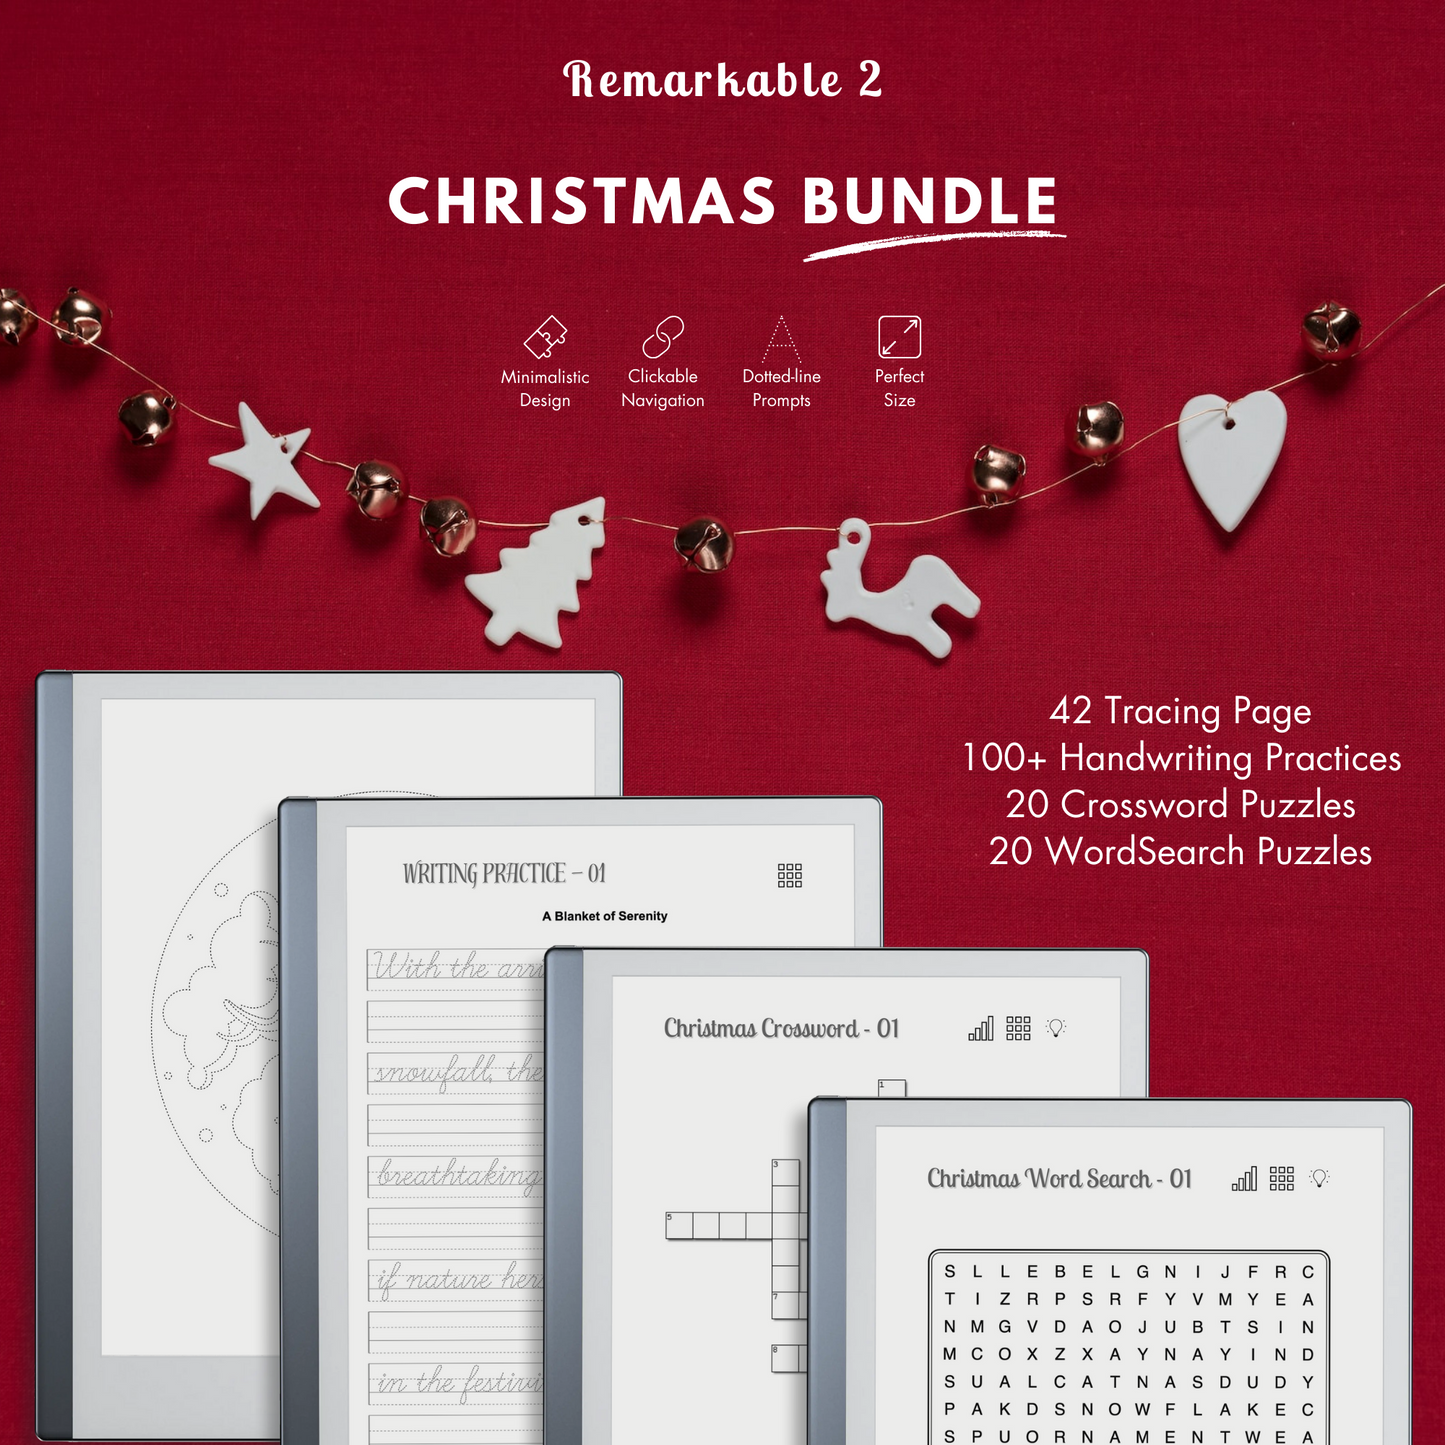 This is a Digital Bundle which includes Christmas Tracing Pages, Christmas Handwriting Practices, Christmas Crossword Puzzles, and Christmas Word Search Challenges tailored for Remarkable 2.